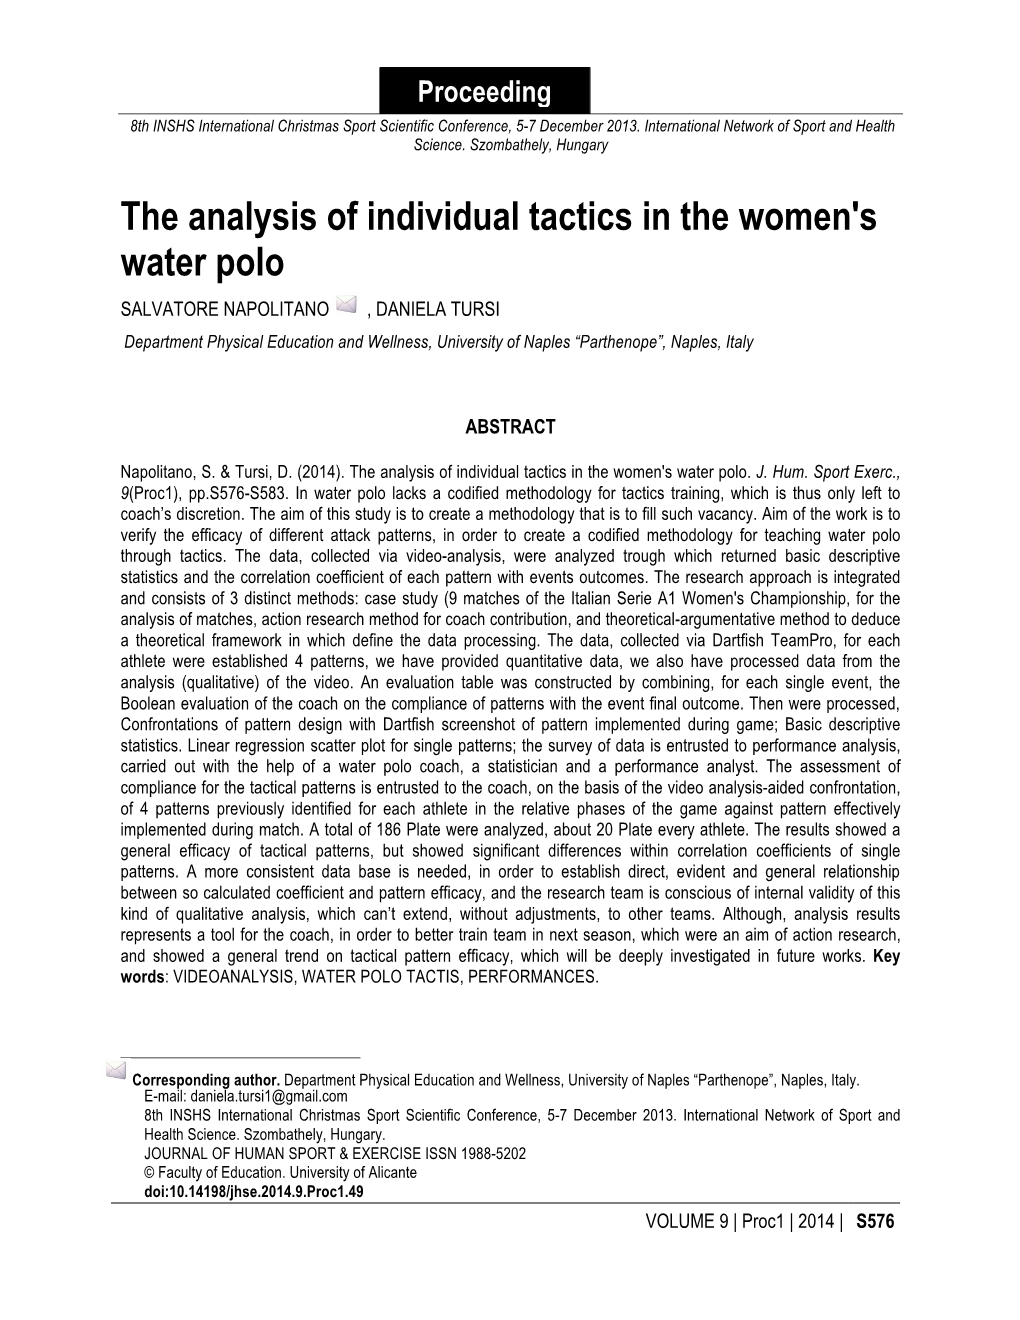 The Analysis of Individual Tactics in the Women's Water Polo